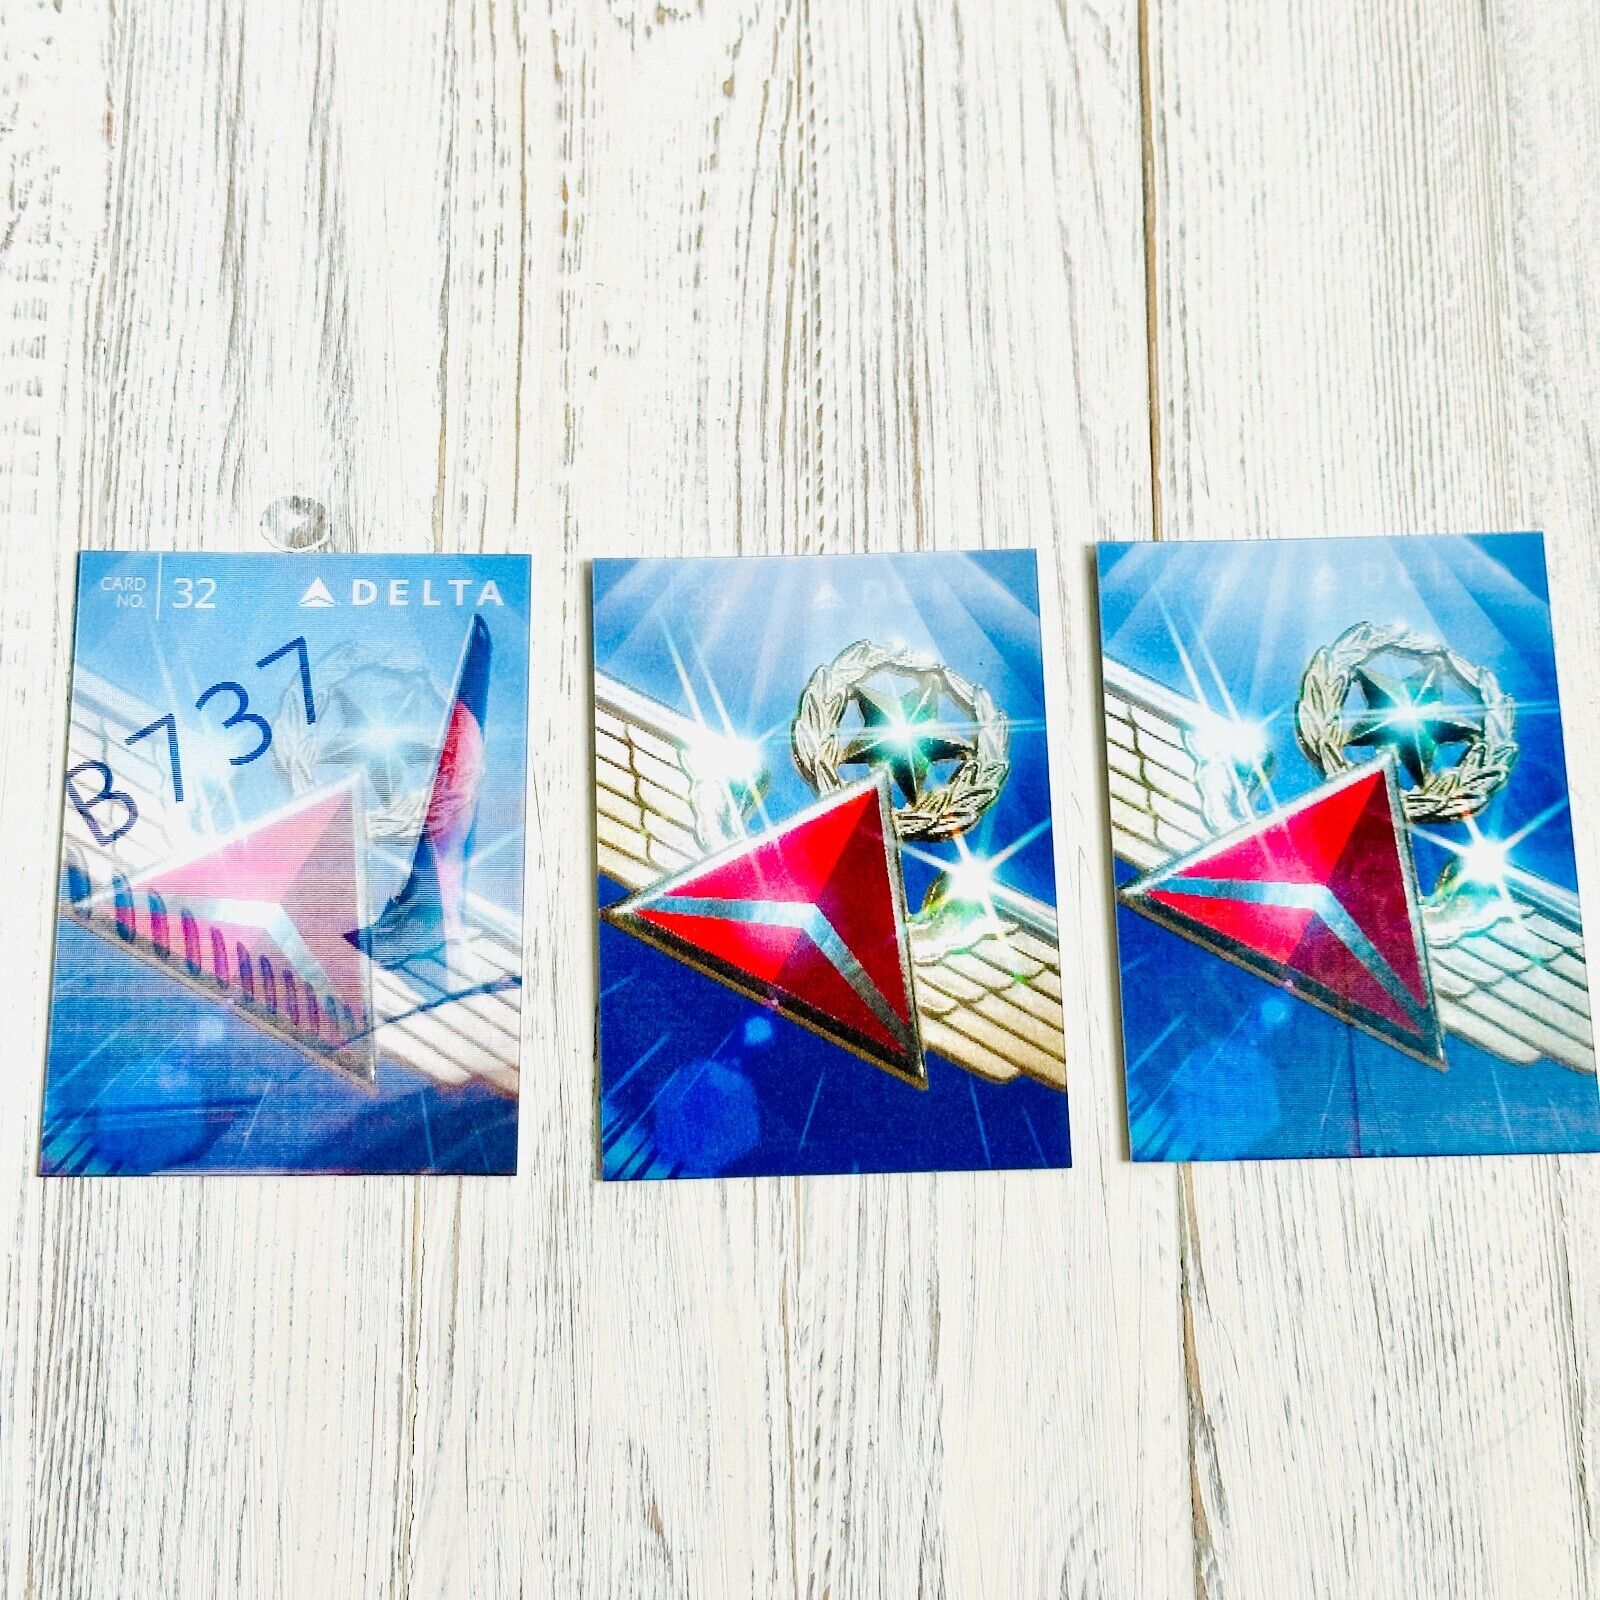 Delta Airline Pilot Trading/Collectible Cards Boeing Holographic (set of 3) NEW